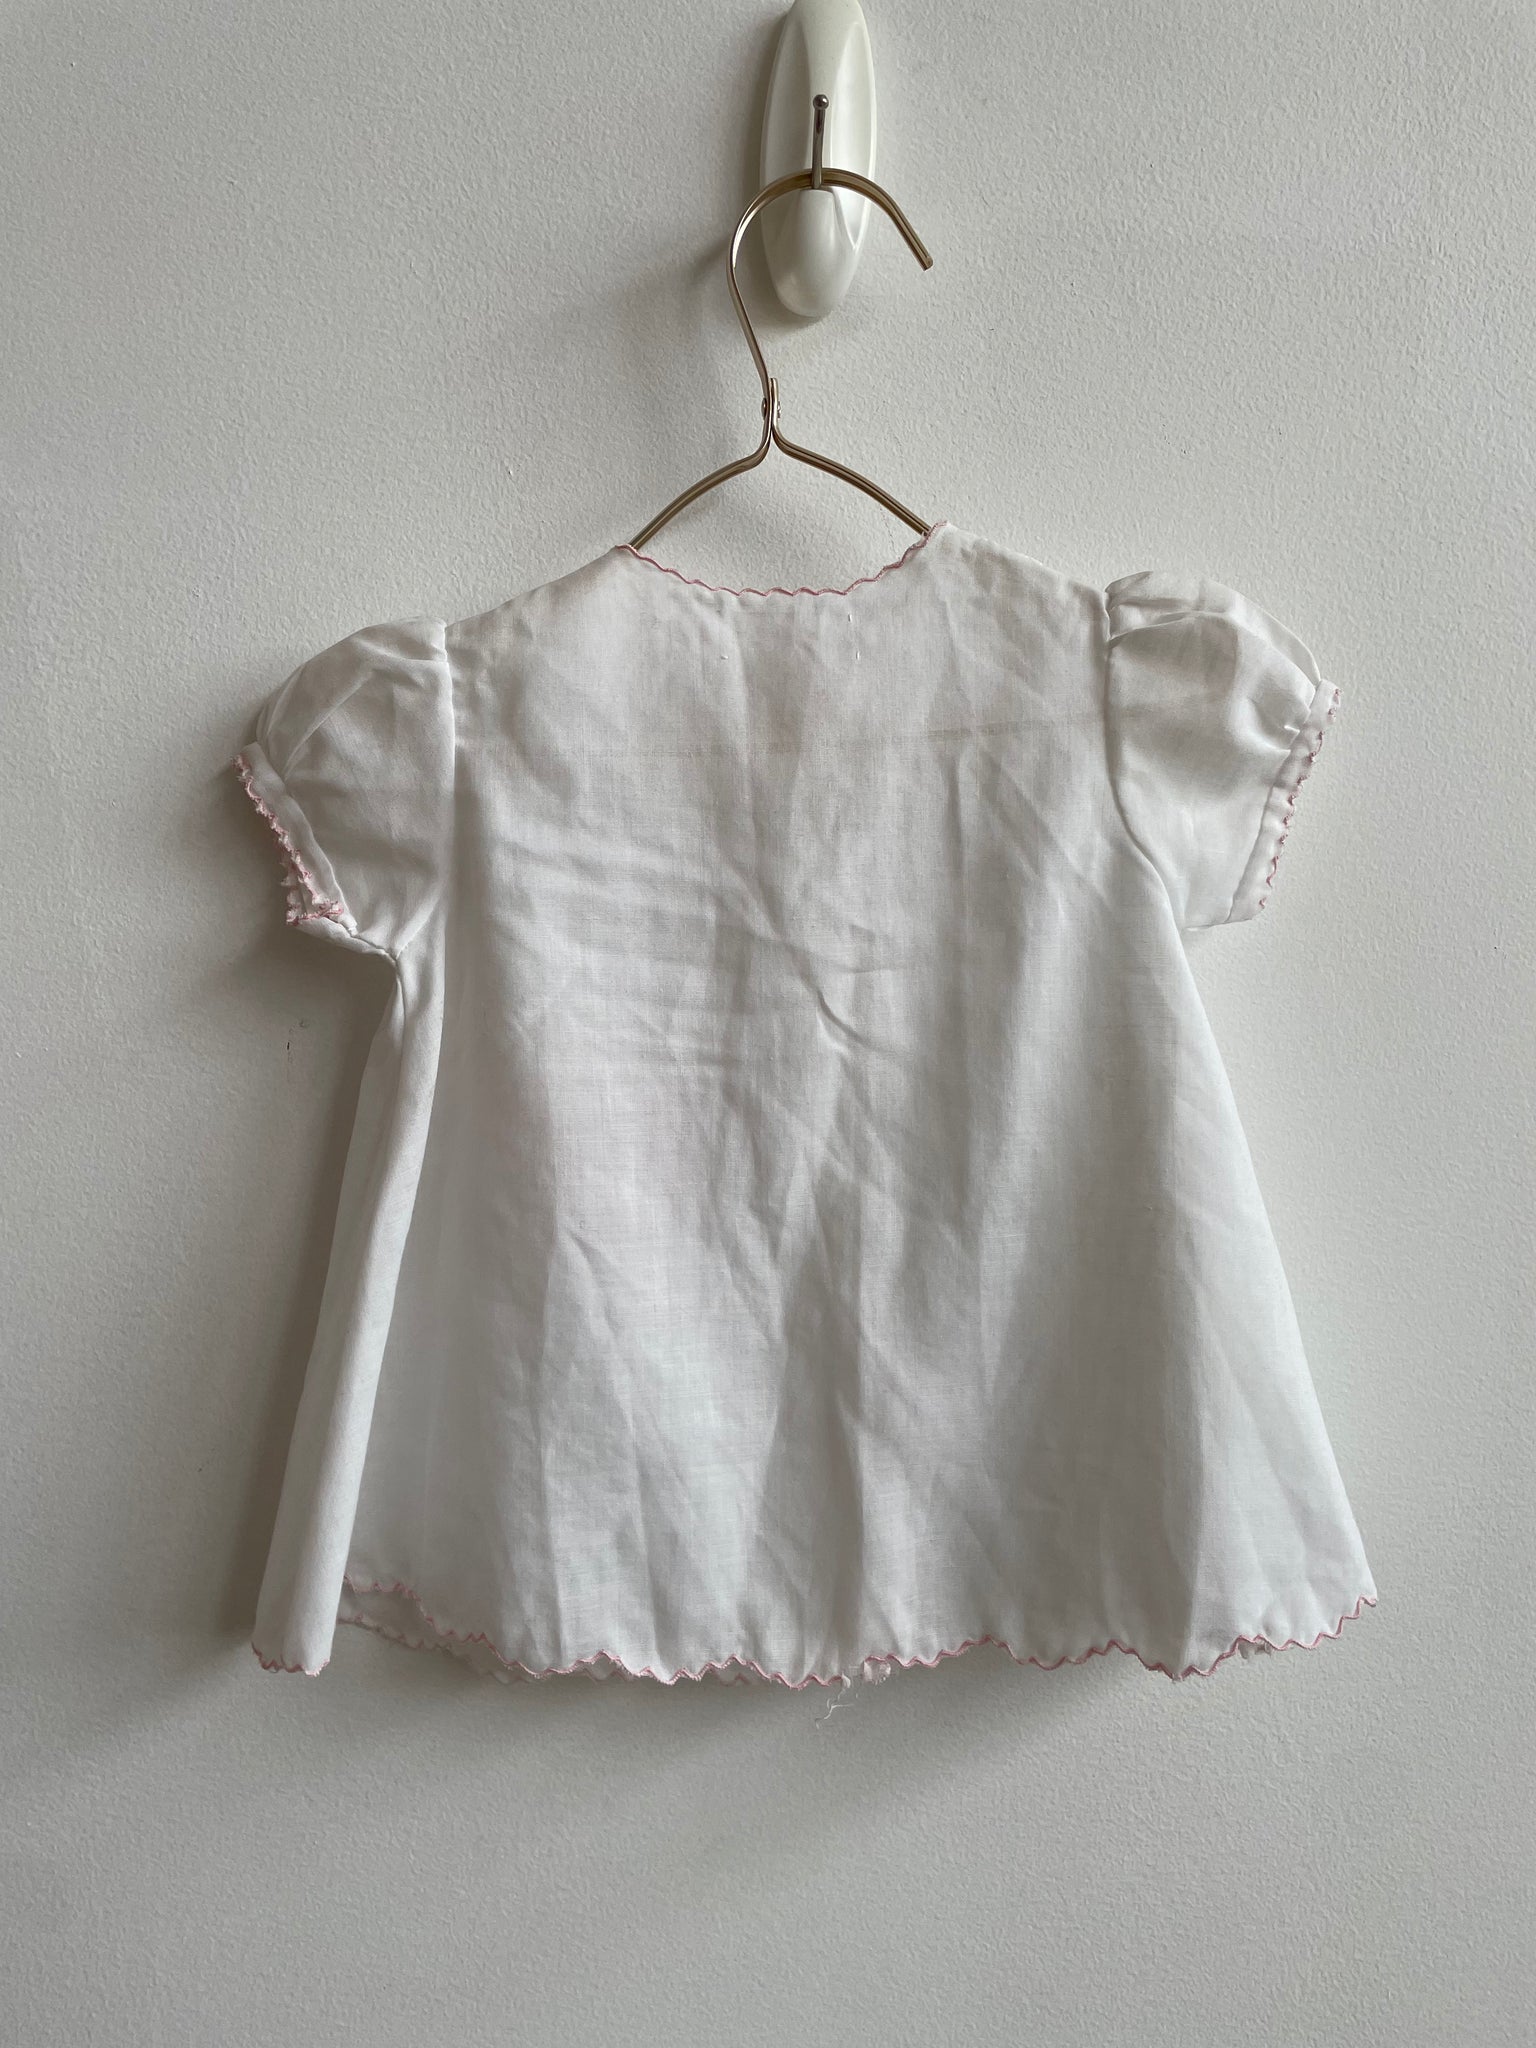 EMBROIDERED DAISY BABY DRESS